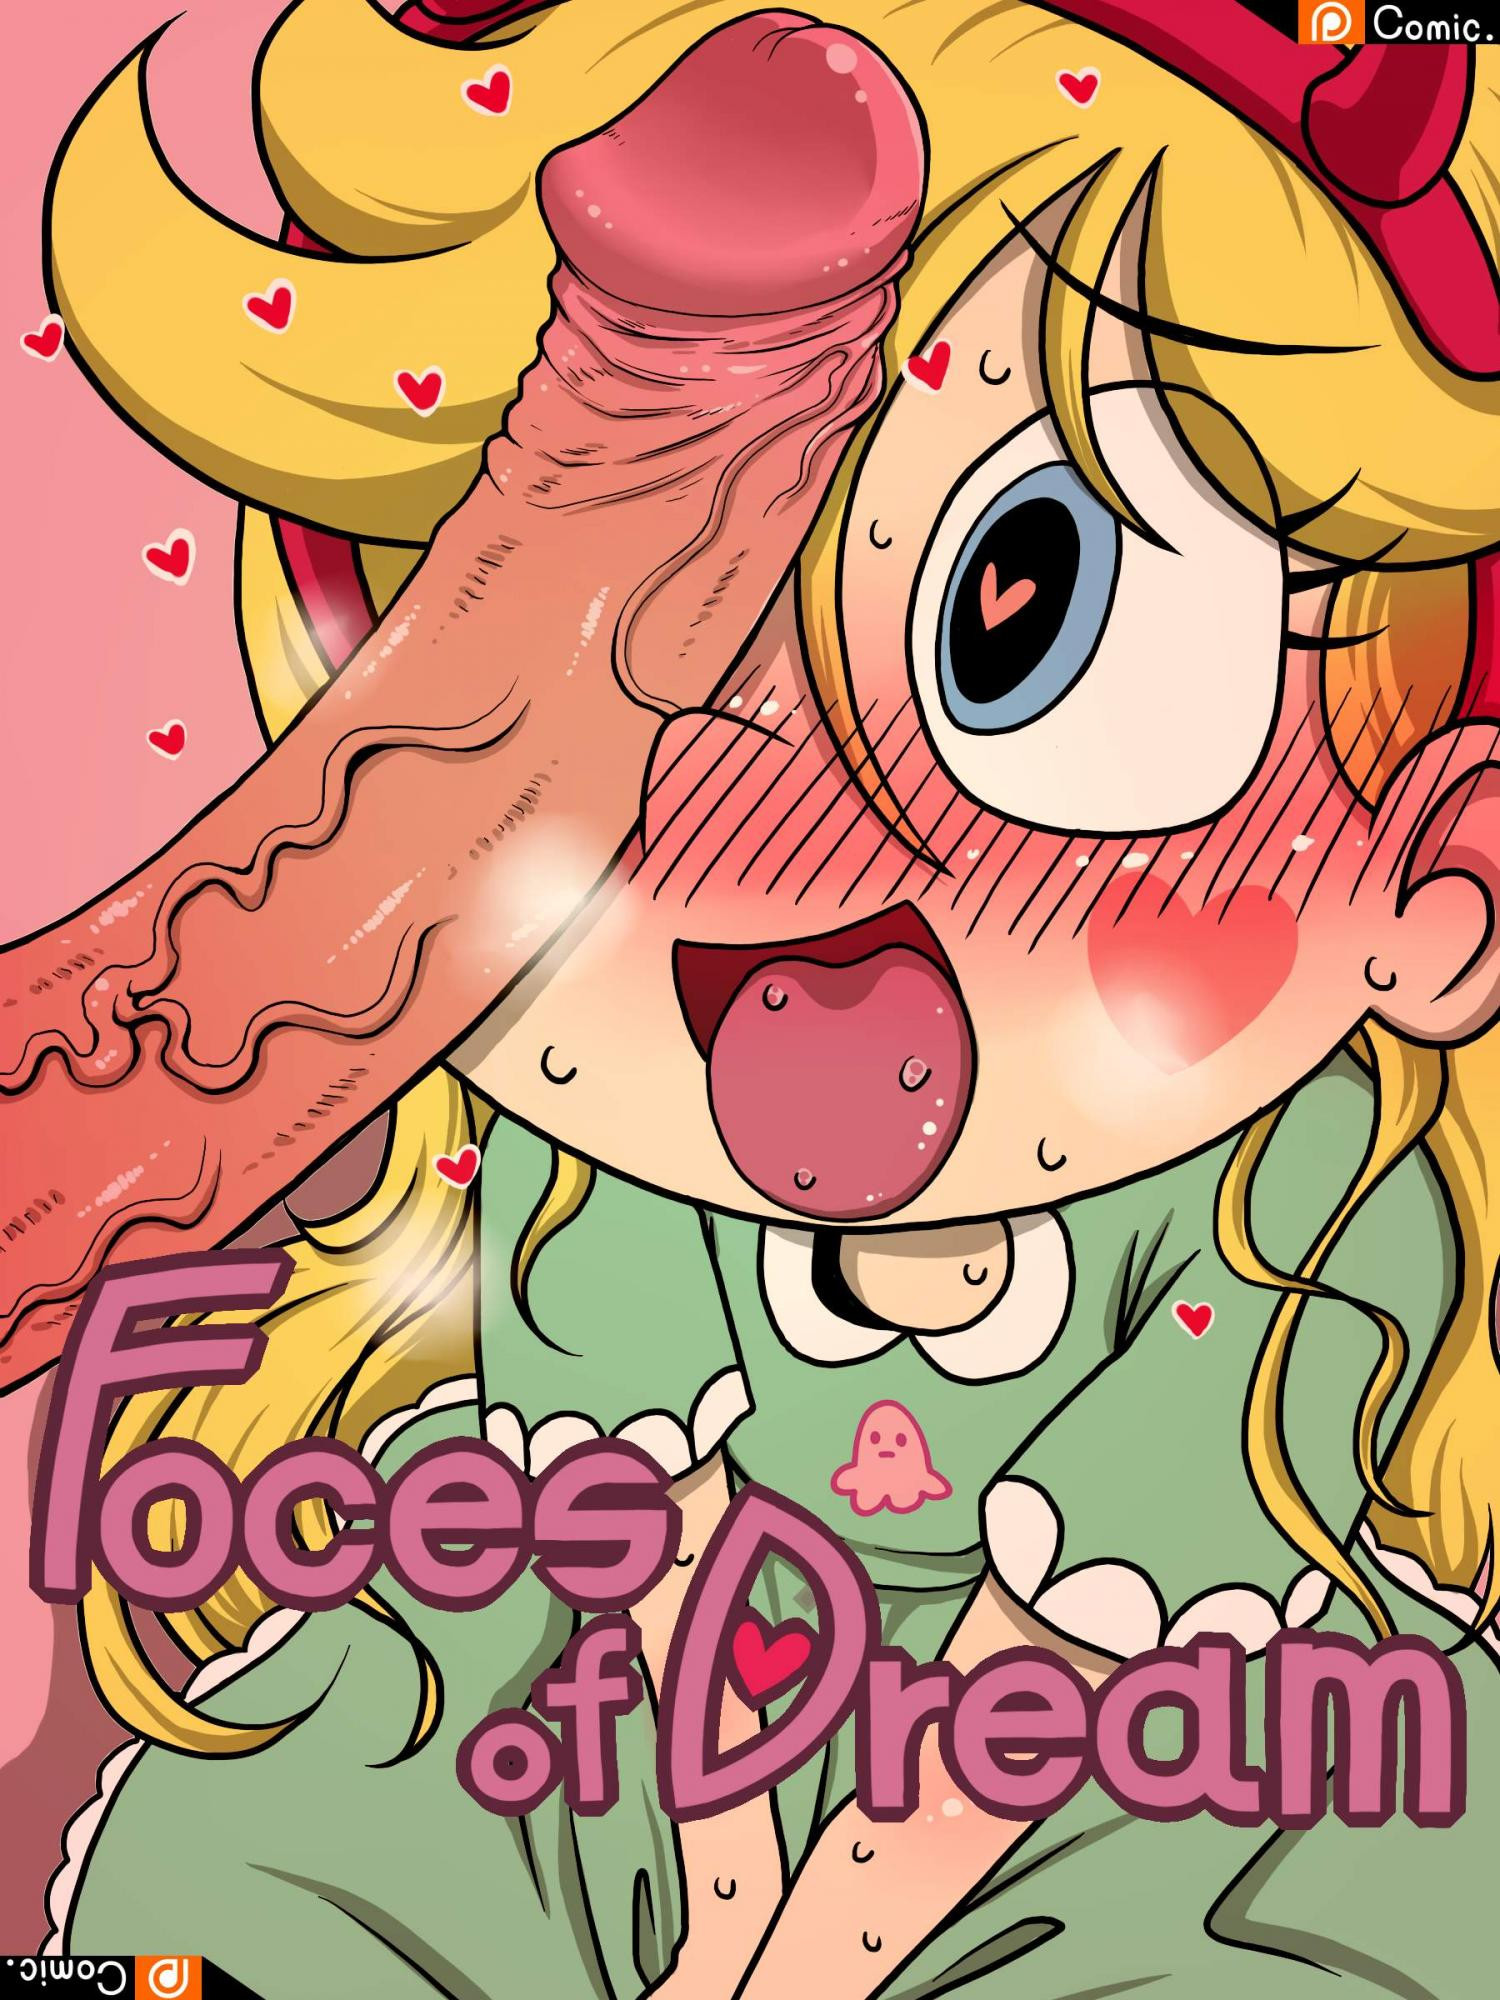 [Zat] Star Vs The Forces Of Evil – Foces of Dream - 0